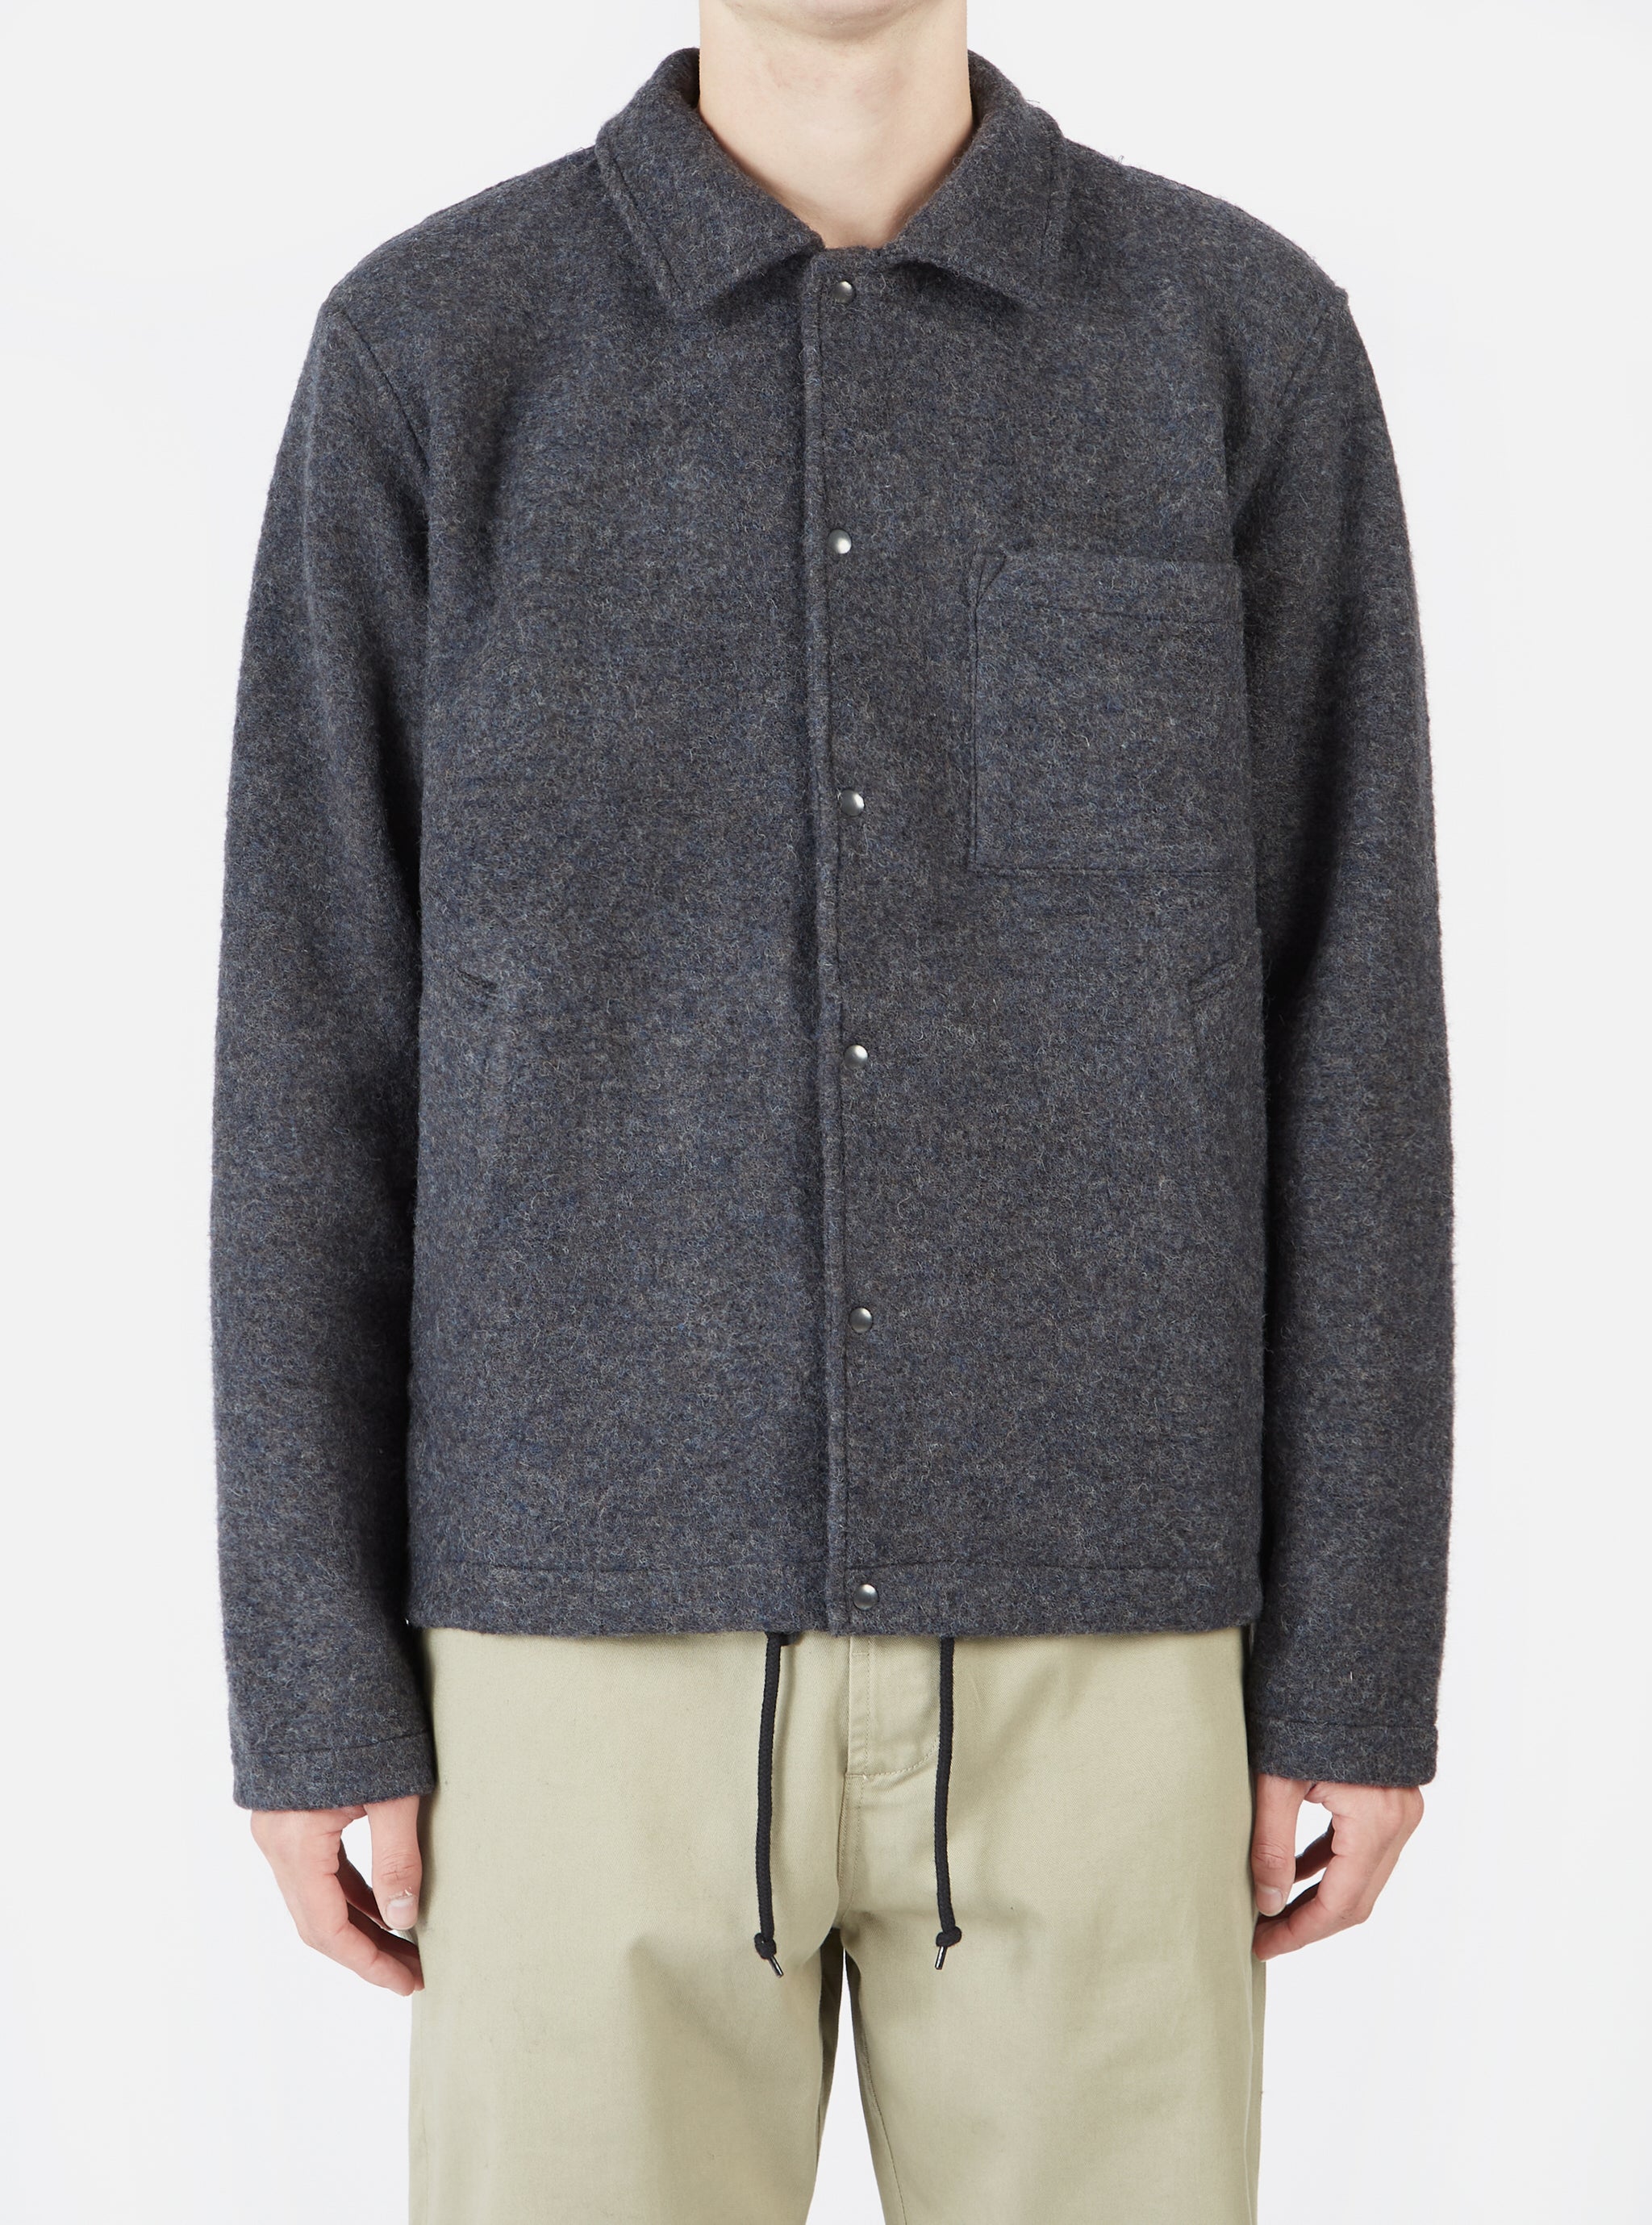 Universal Works Porto Jacket in Charcoal Chante Wool